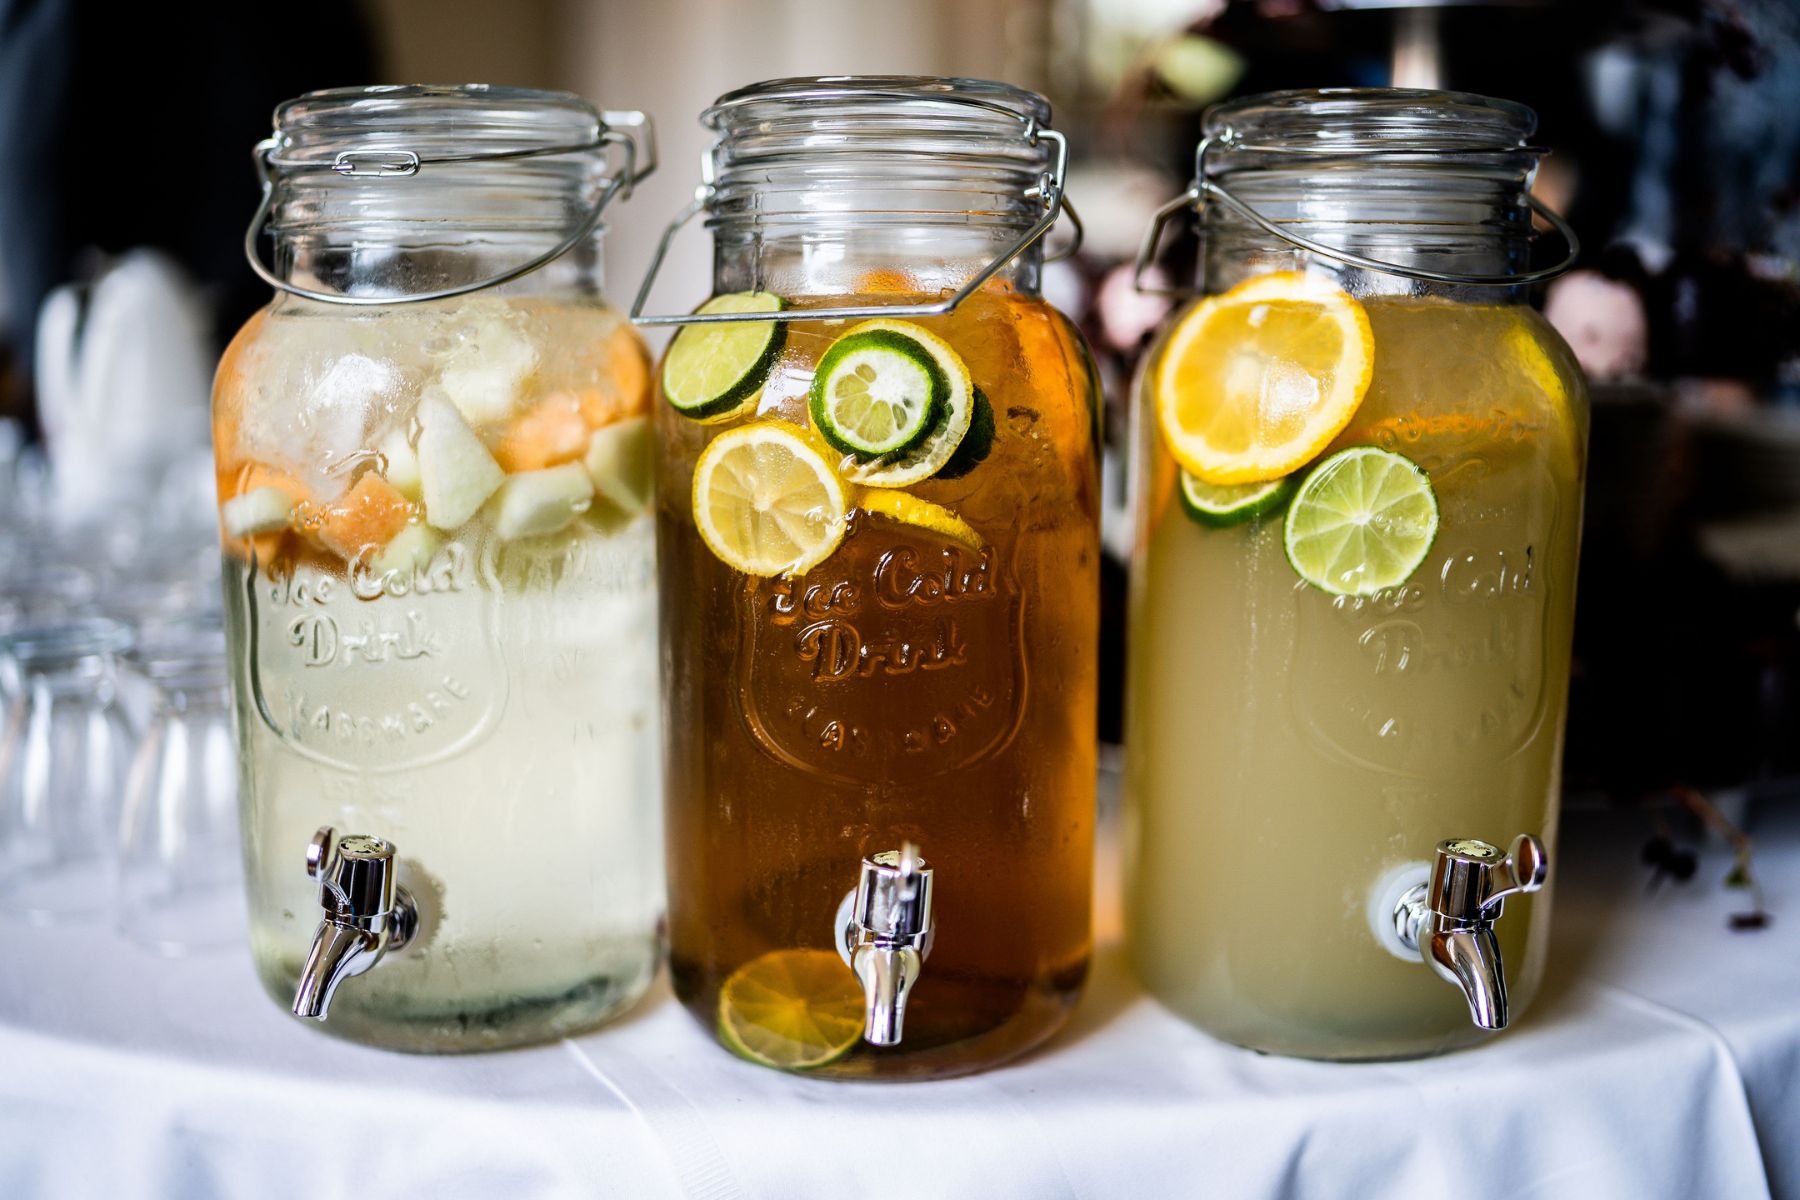 Is a wedding signature drink necessary?